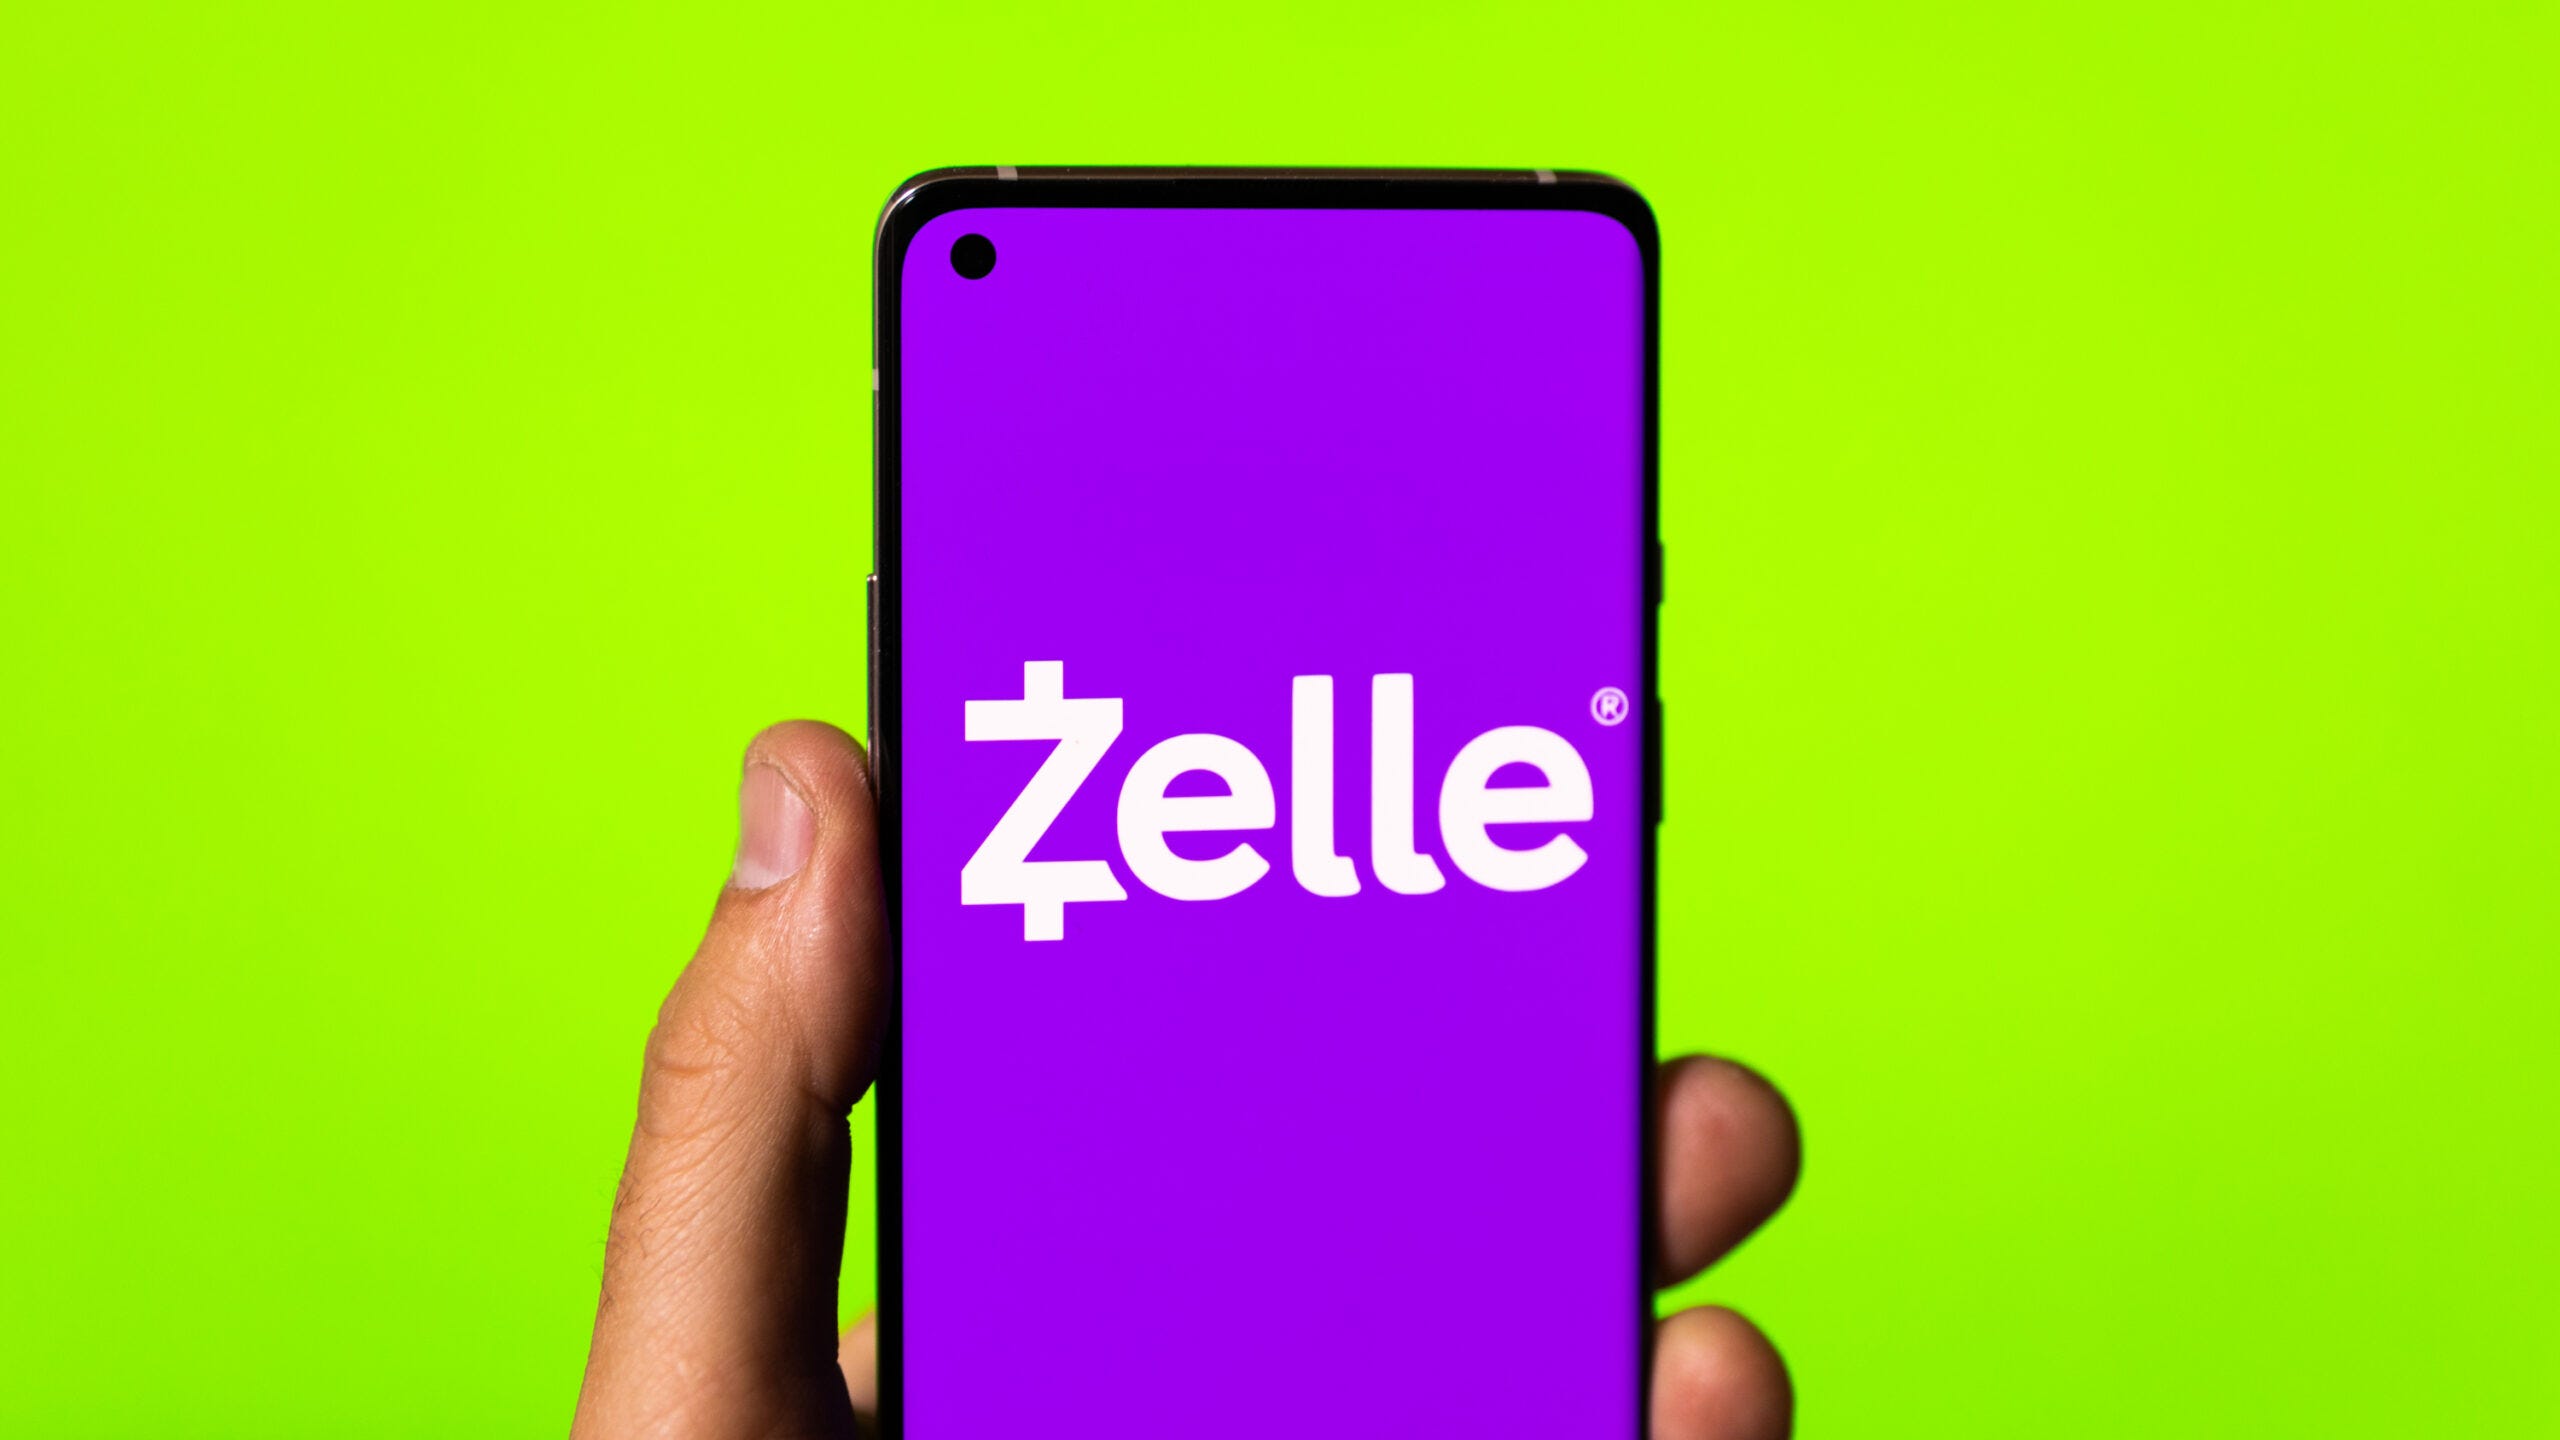 What Is Zelle and How Does It Work?